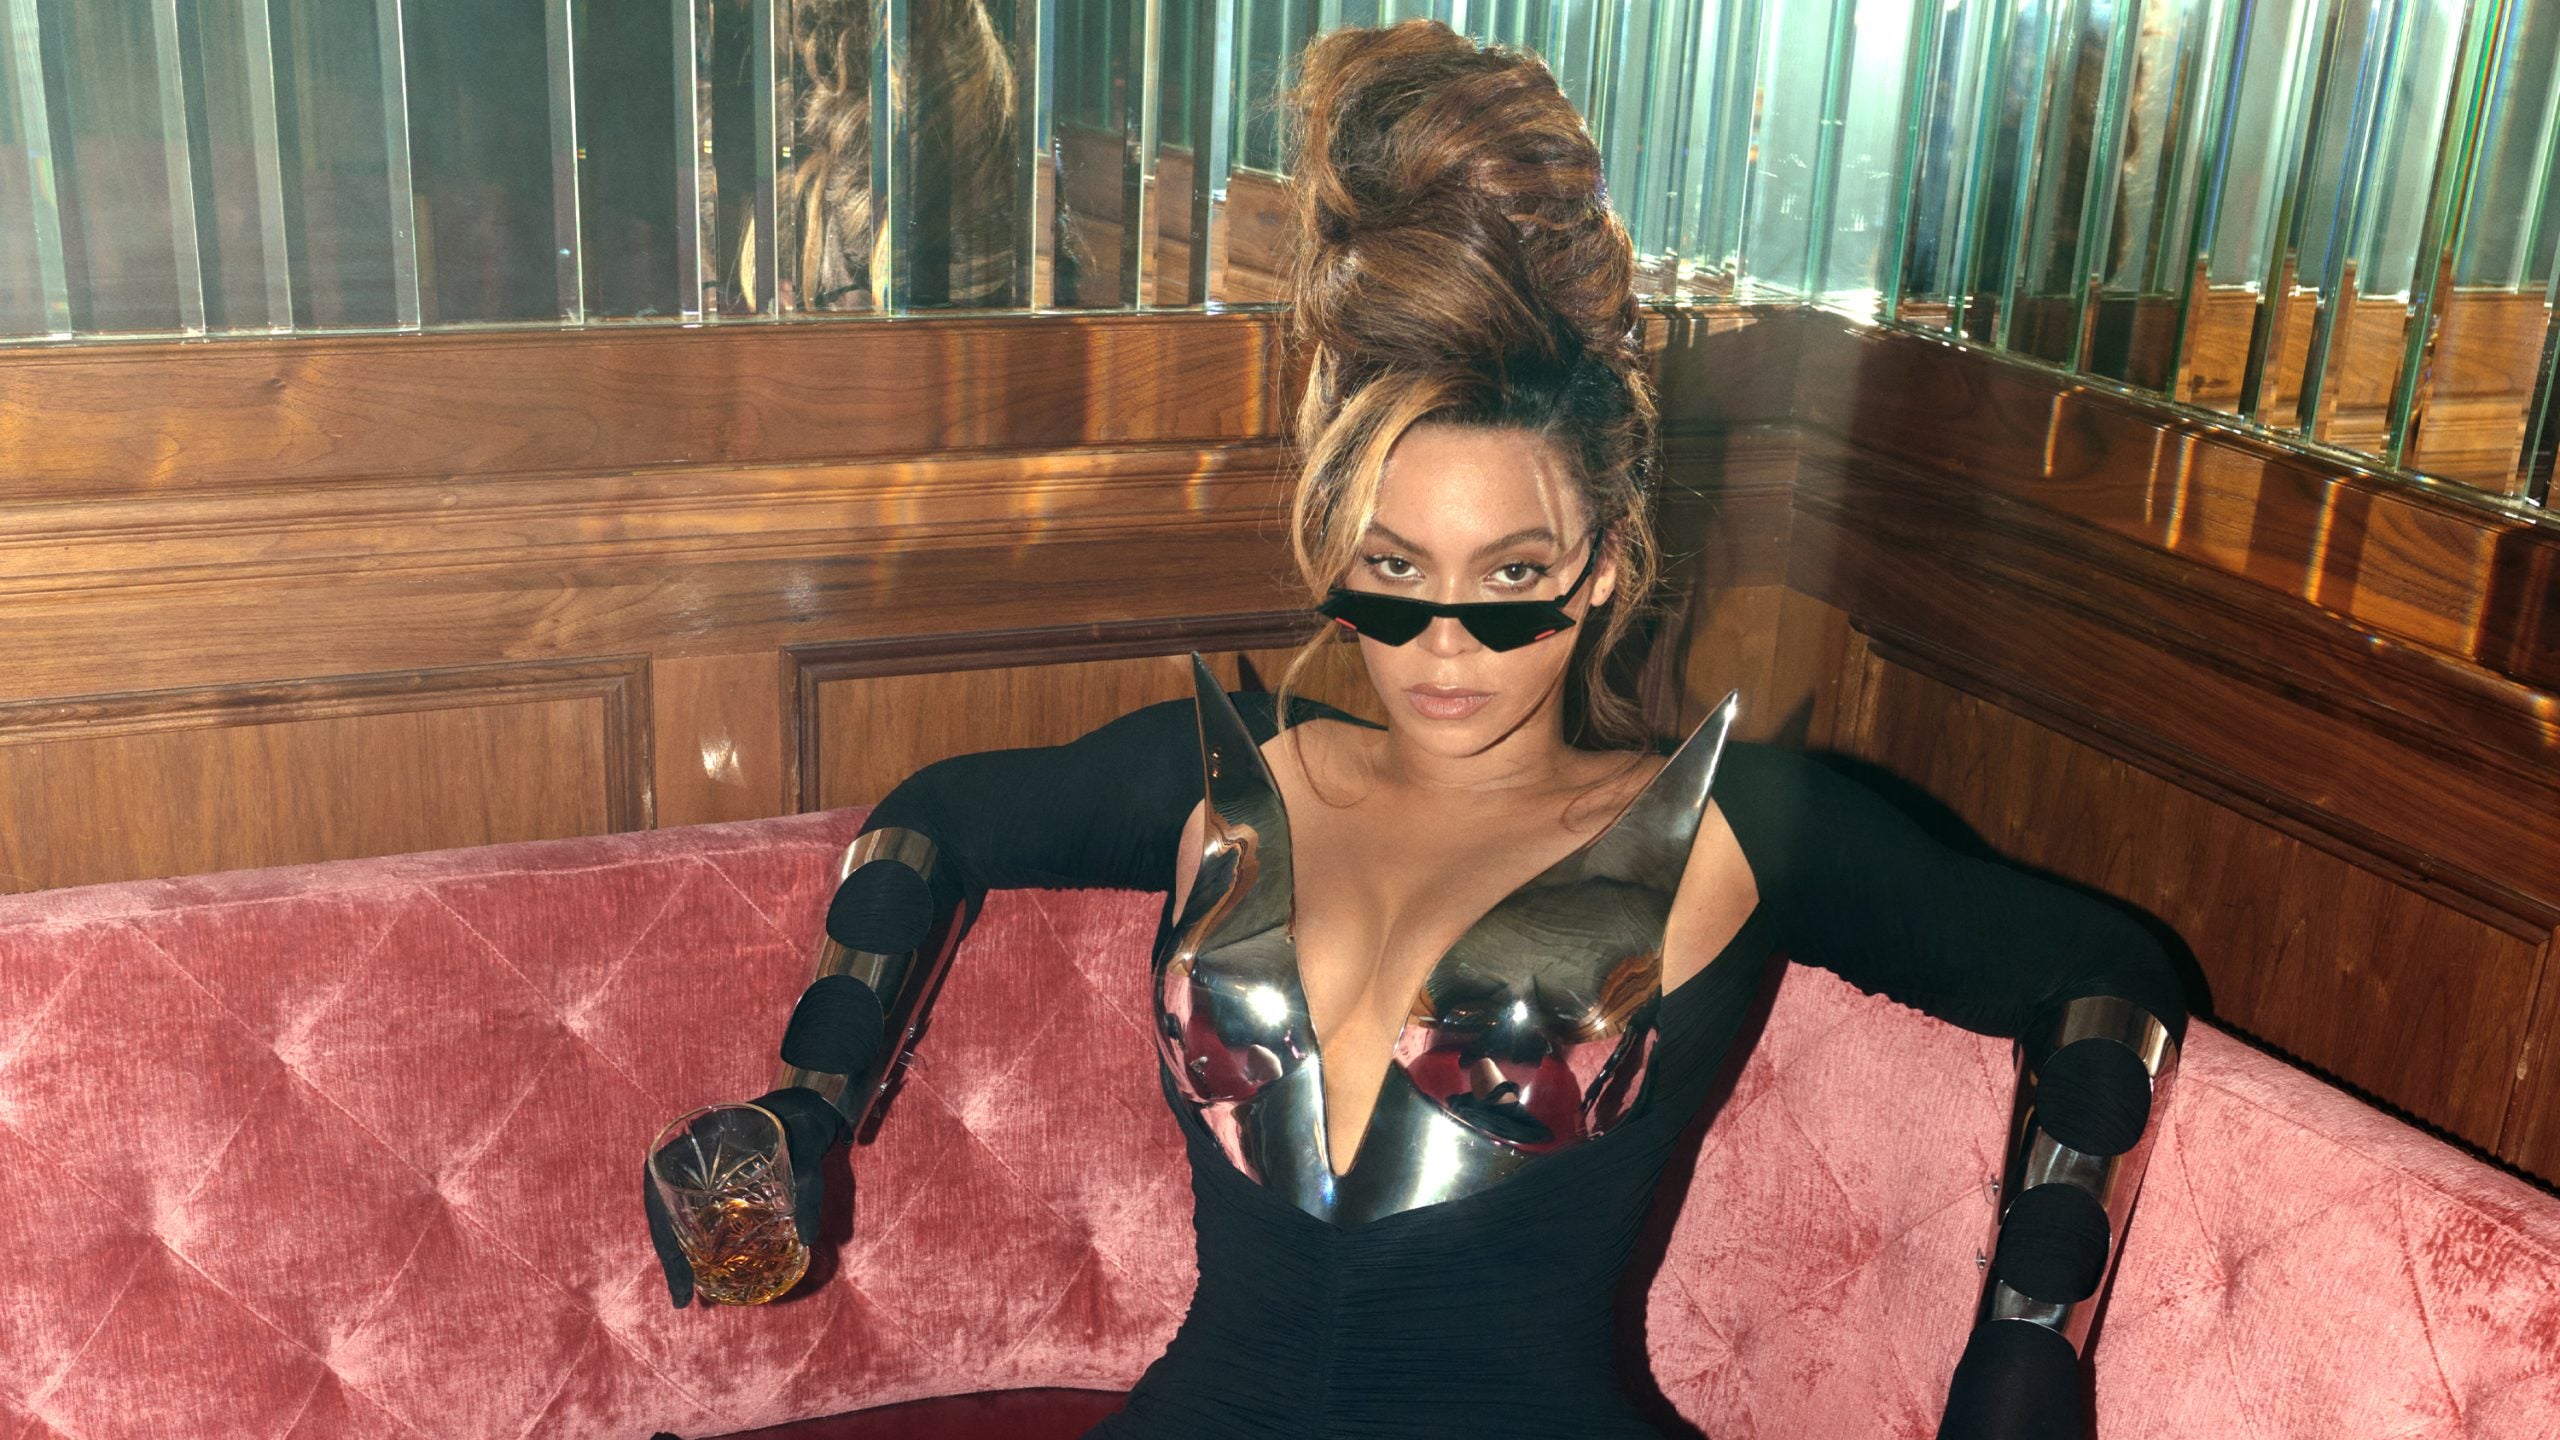 Beyoncé Releases Visual Teaser For ‘I’m That Girl’